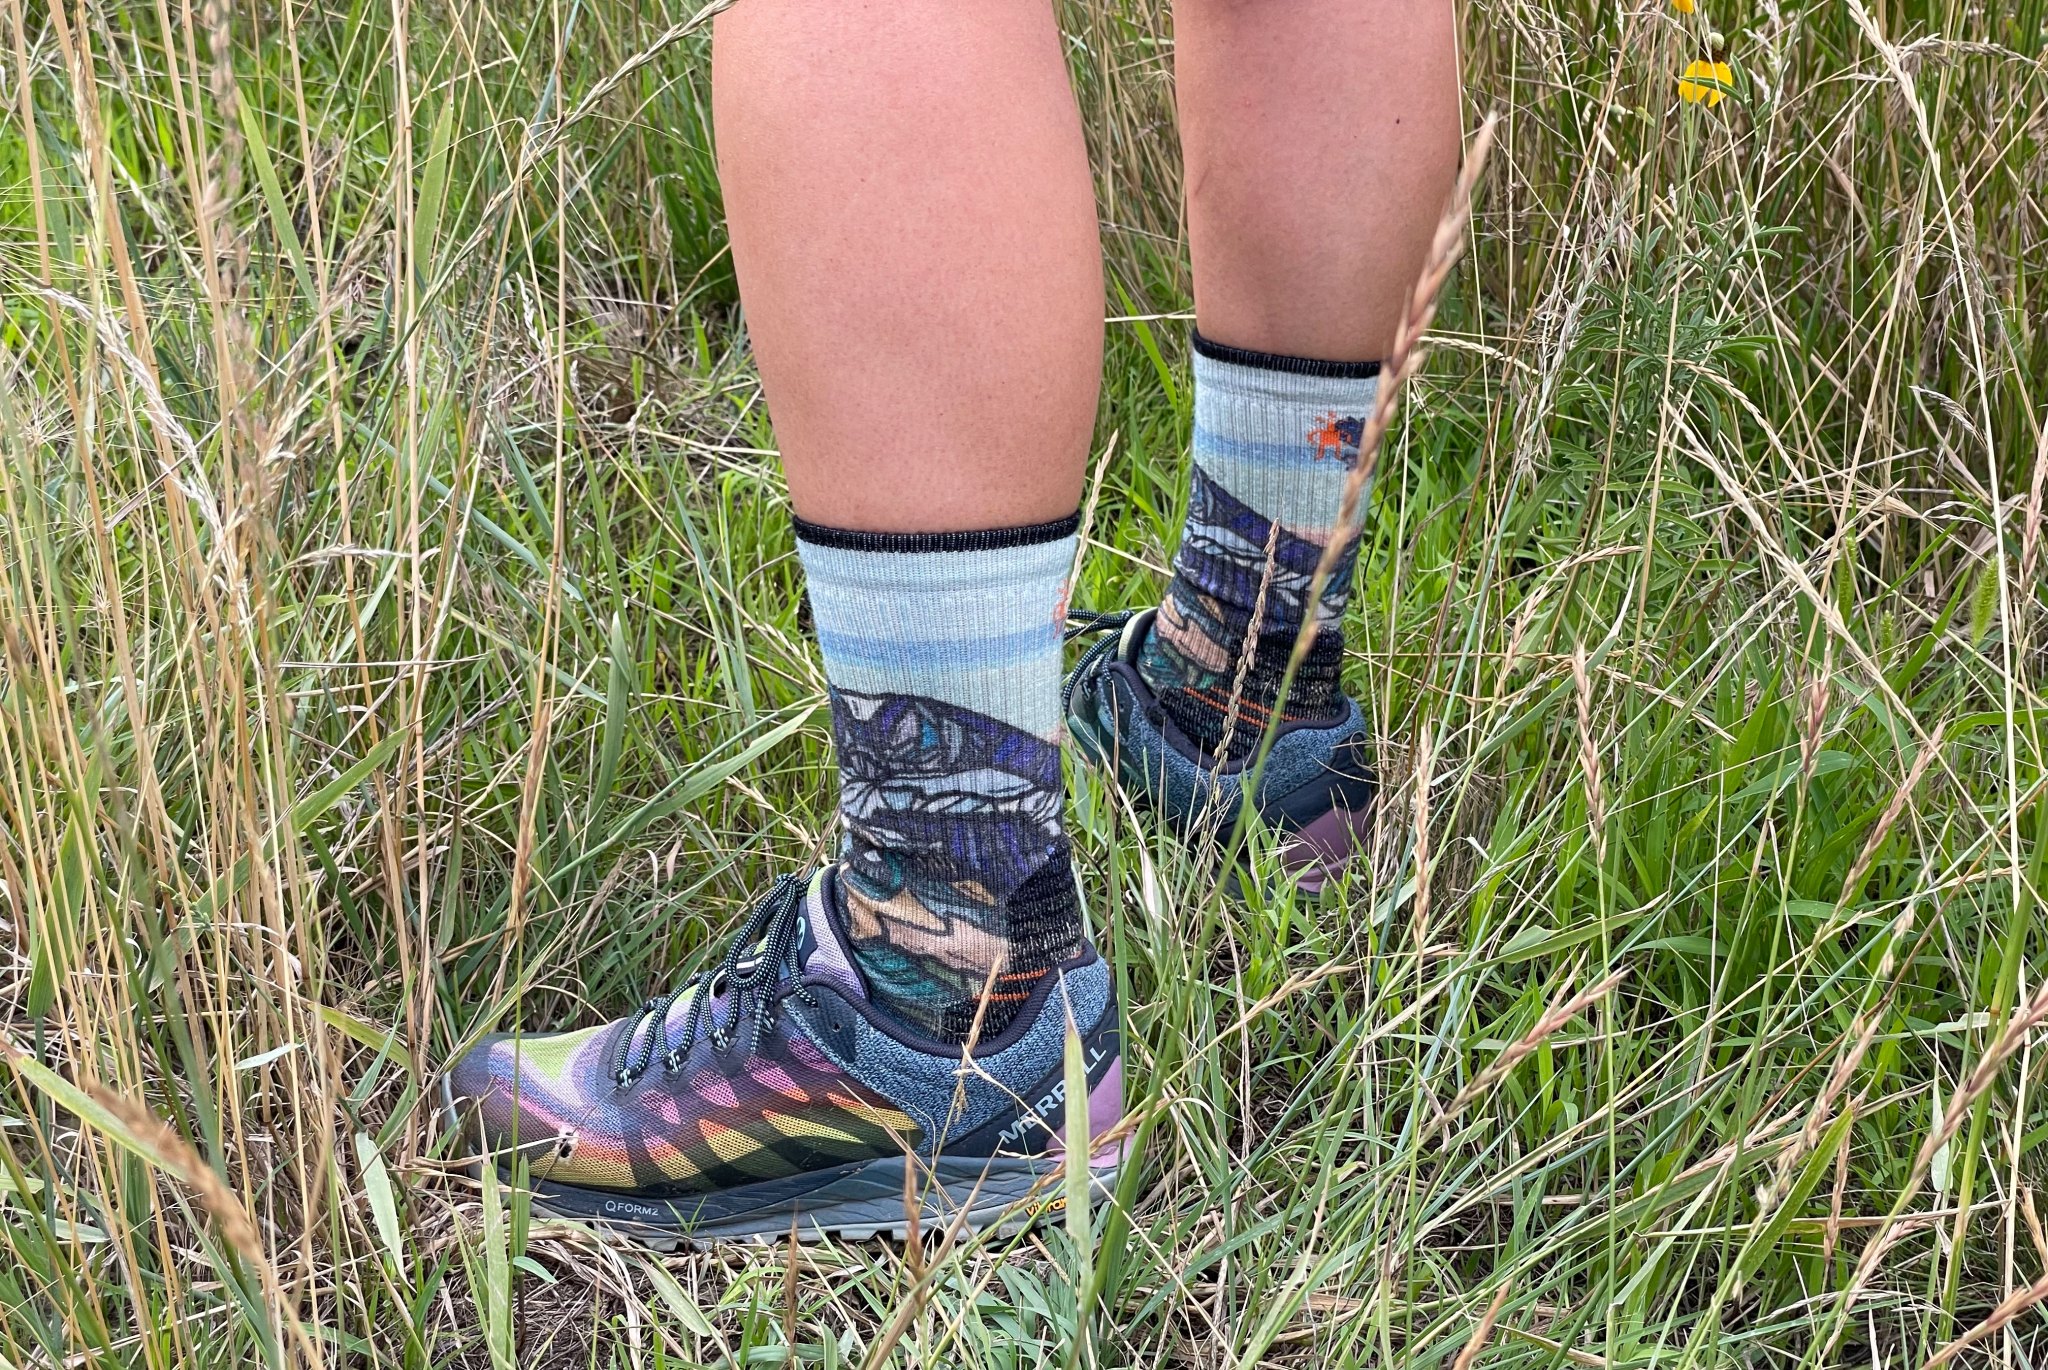 Smartwool Hiking Socks Are Worth the Money, According to a Hiker